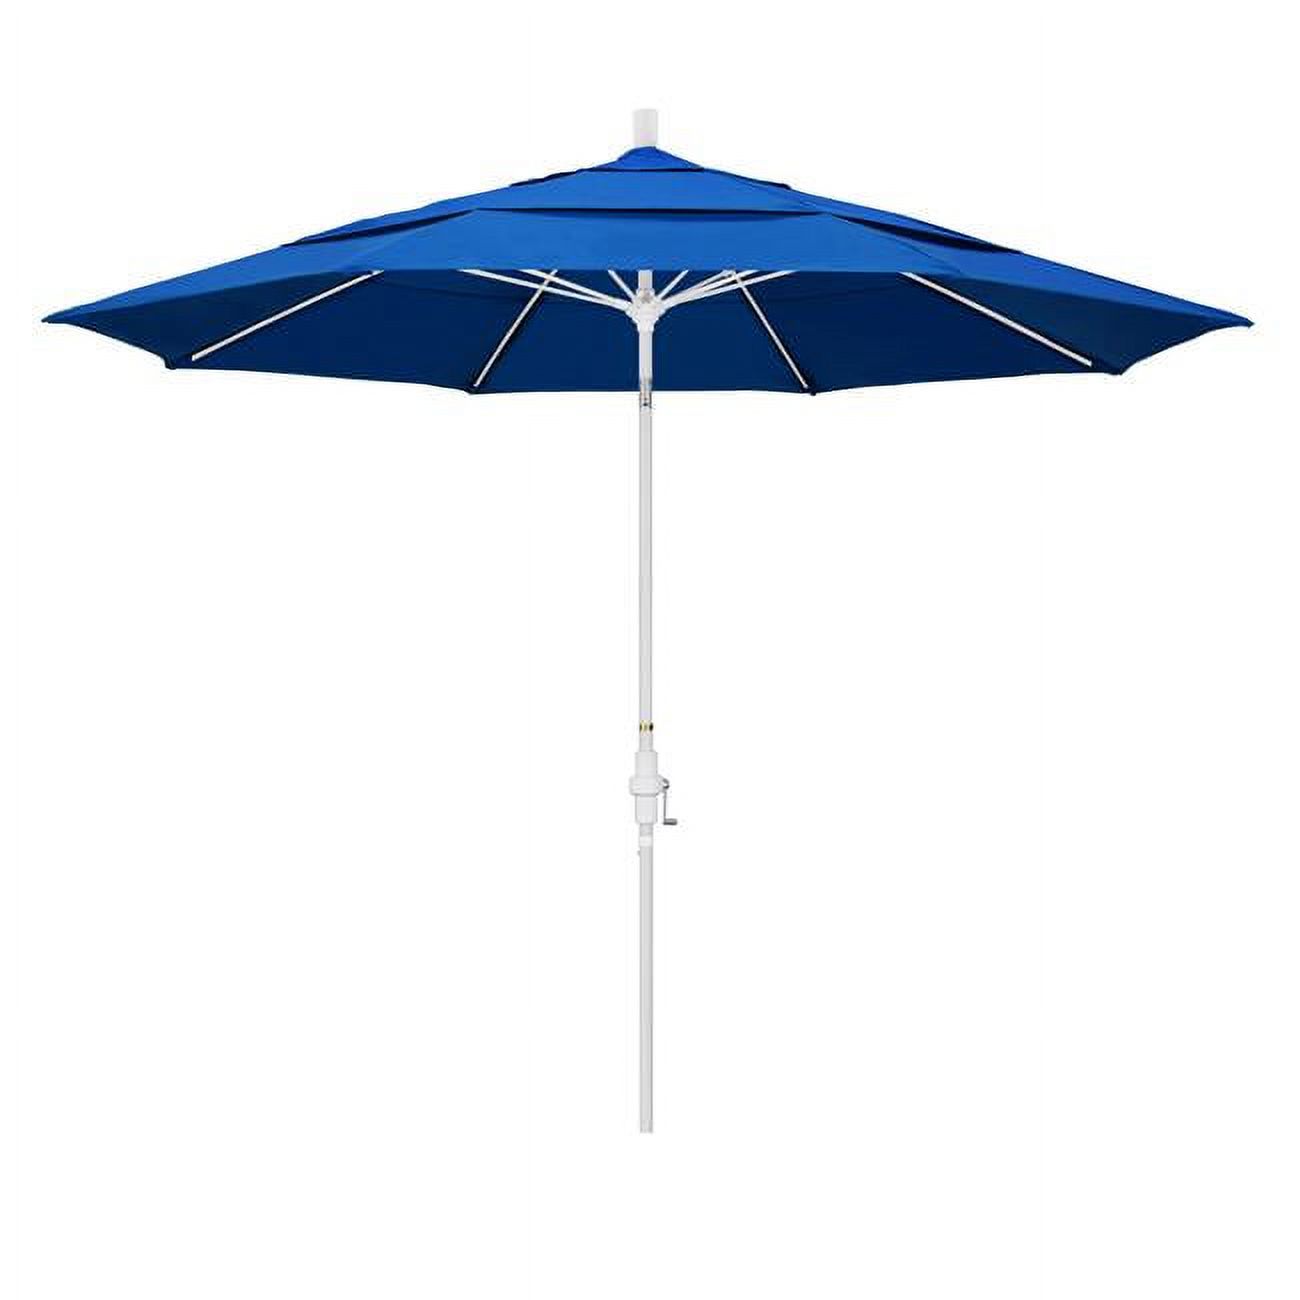 Havenside Home Perry 11ft Crank Lift Aluminum Round Umbrella by , Base Not Included Black - image 1 of 5